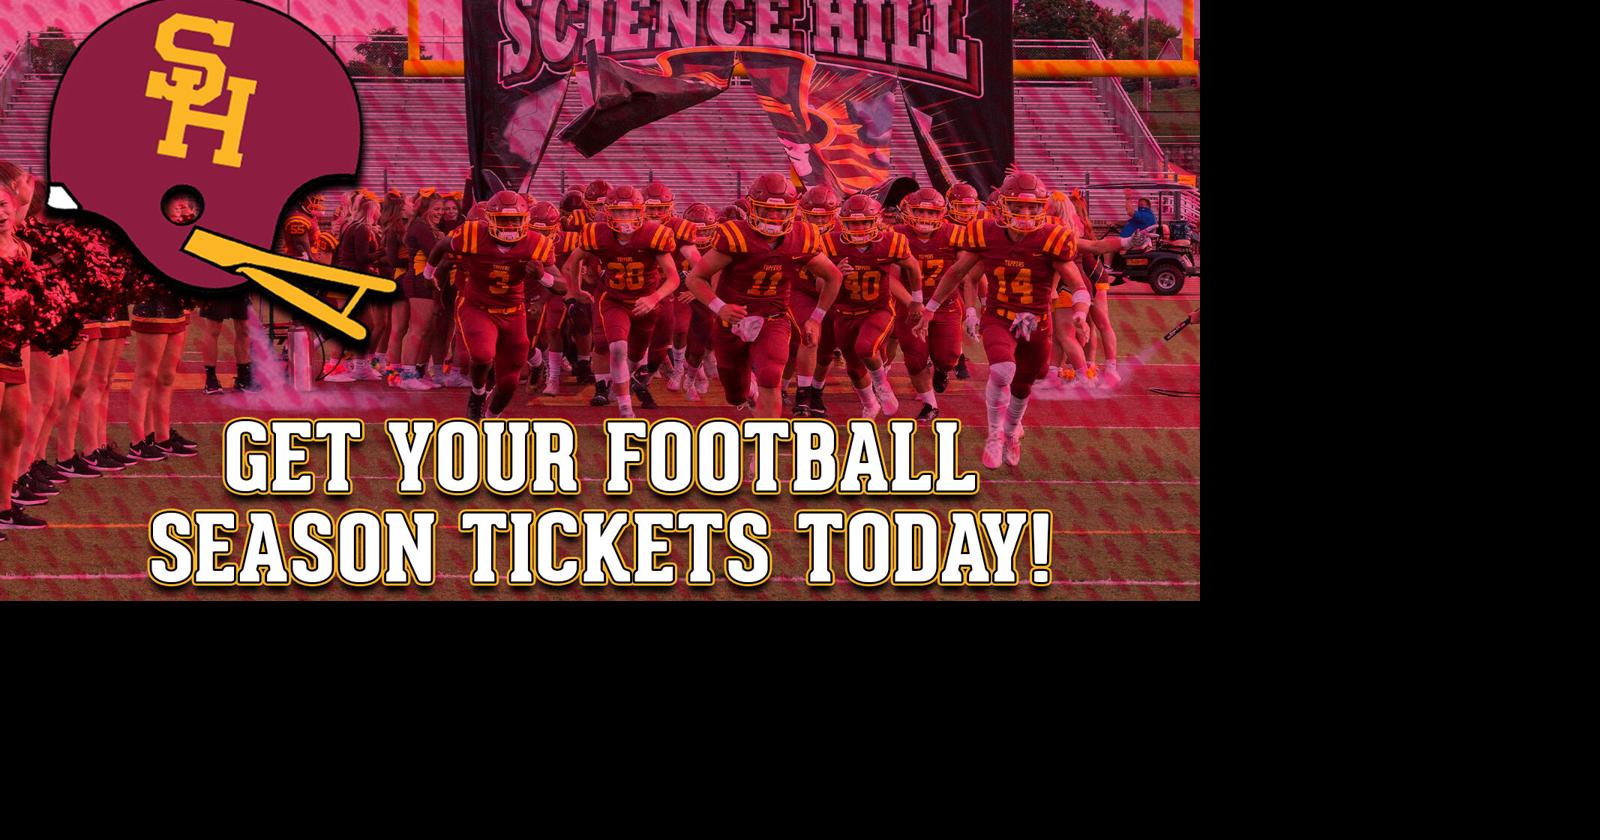 Science Hill football season tickets now available Education